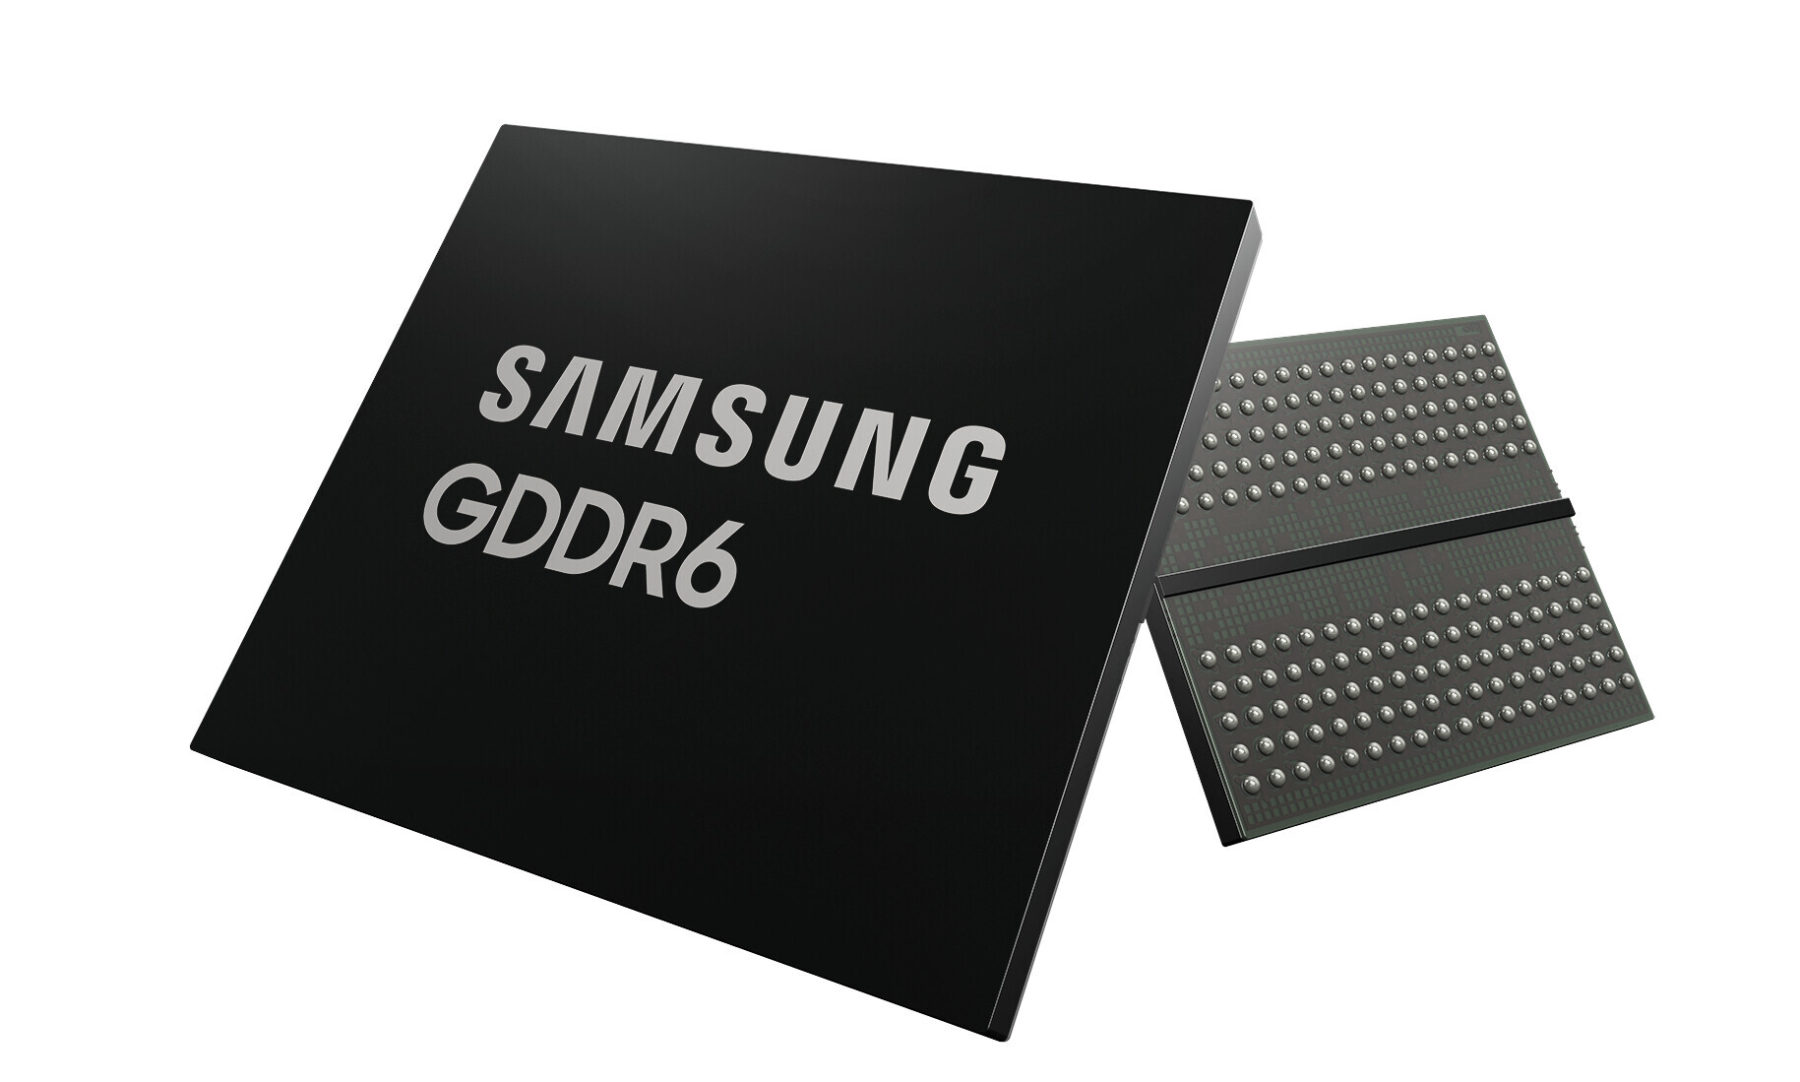 Samsung Launches Industry'S First 24Gbps Gddr6 Memory